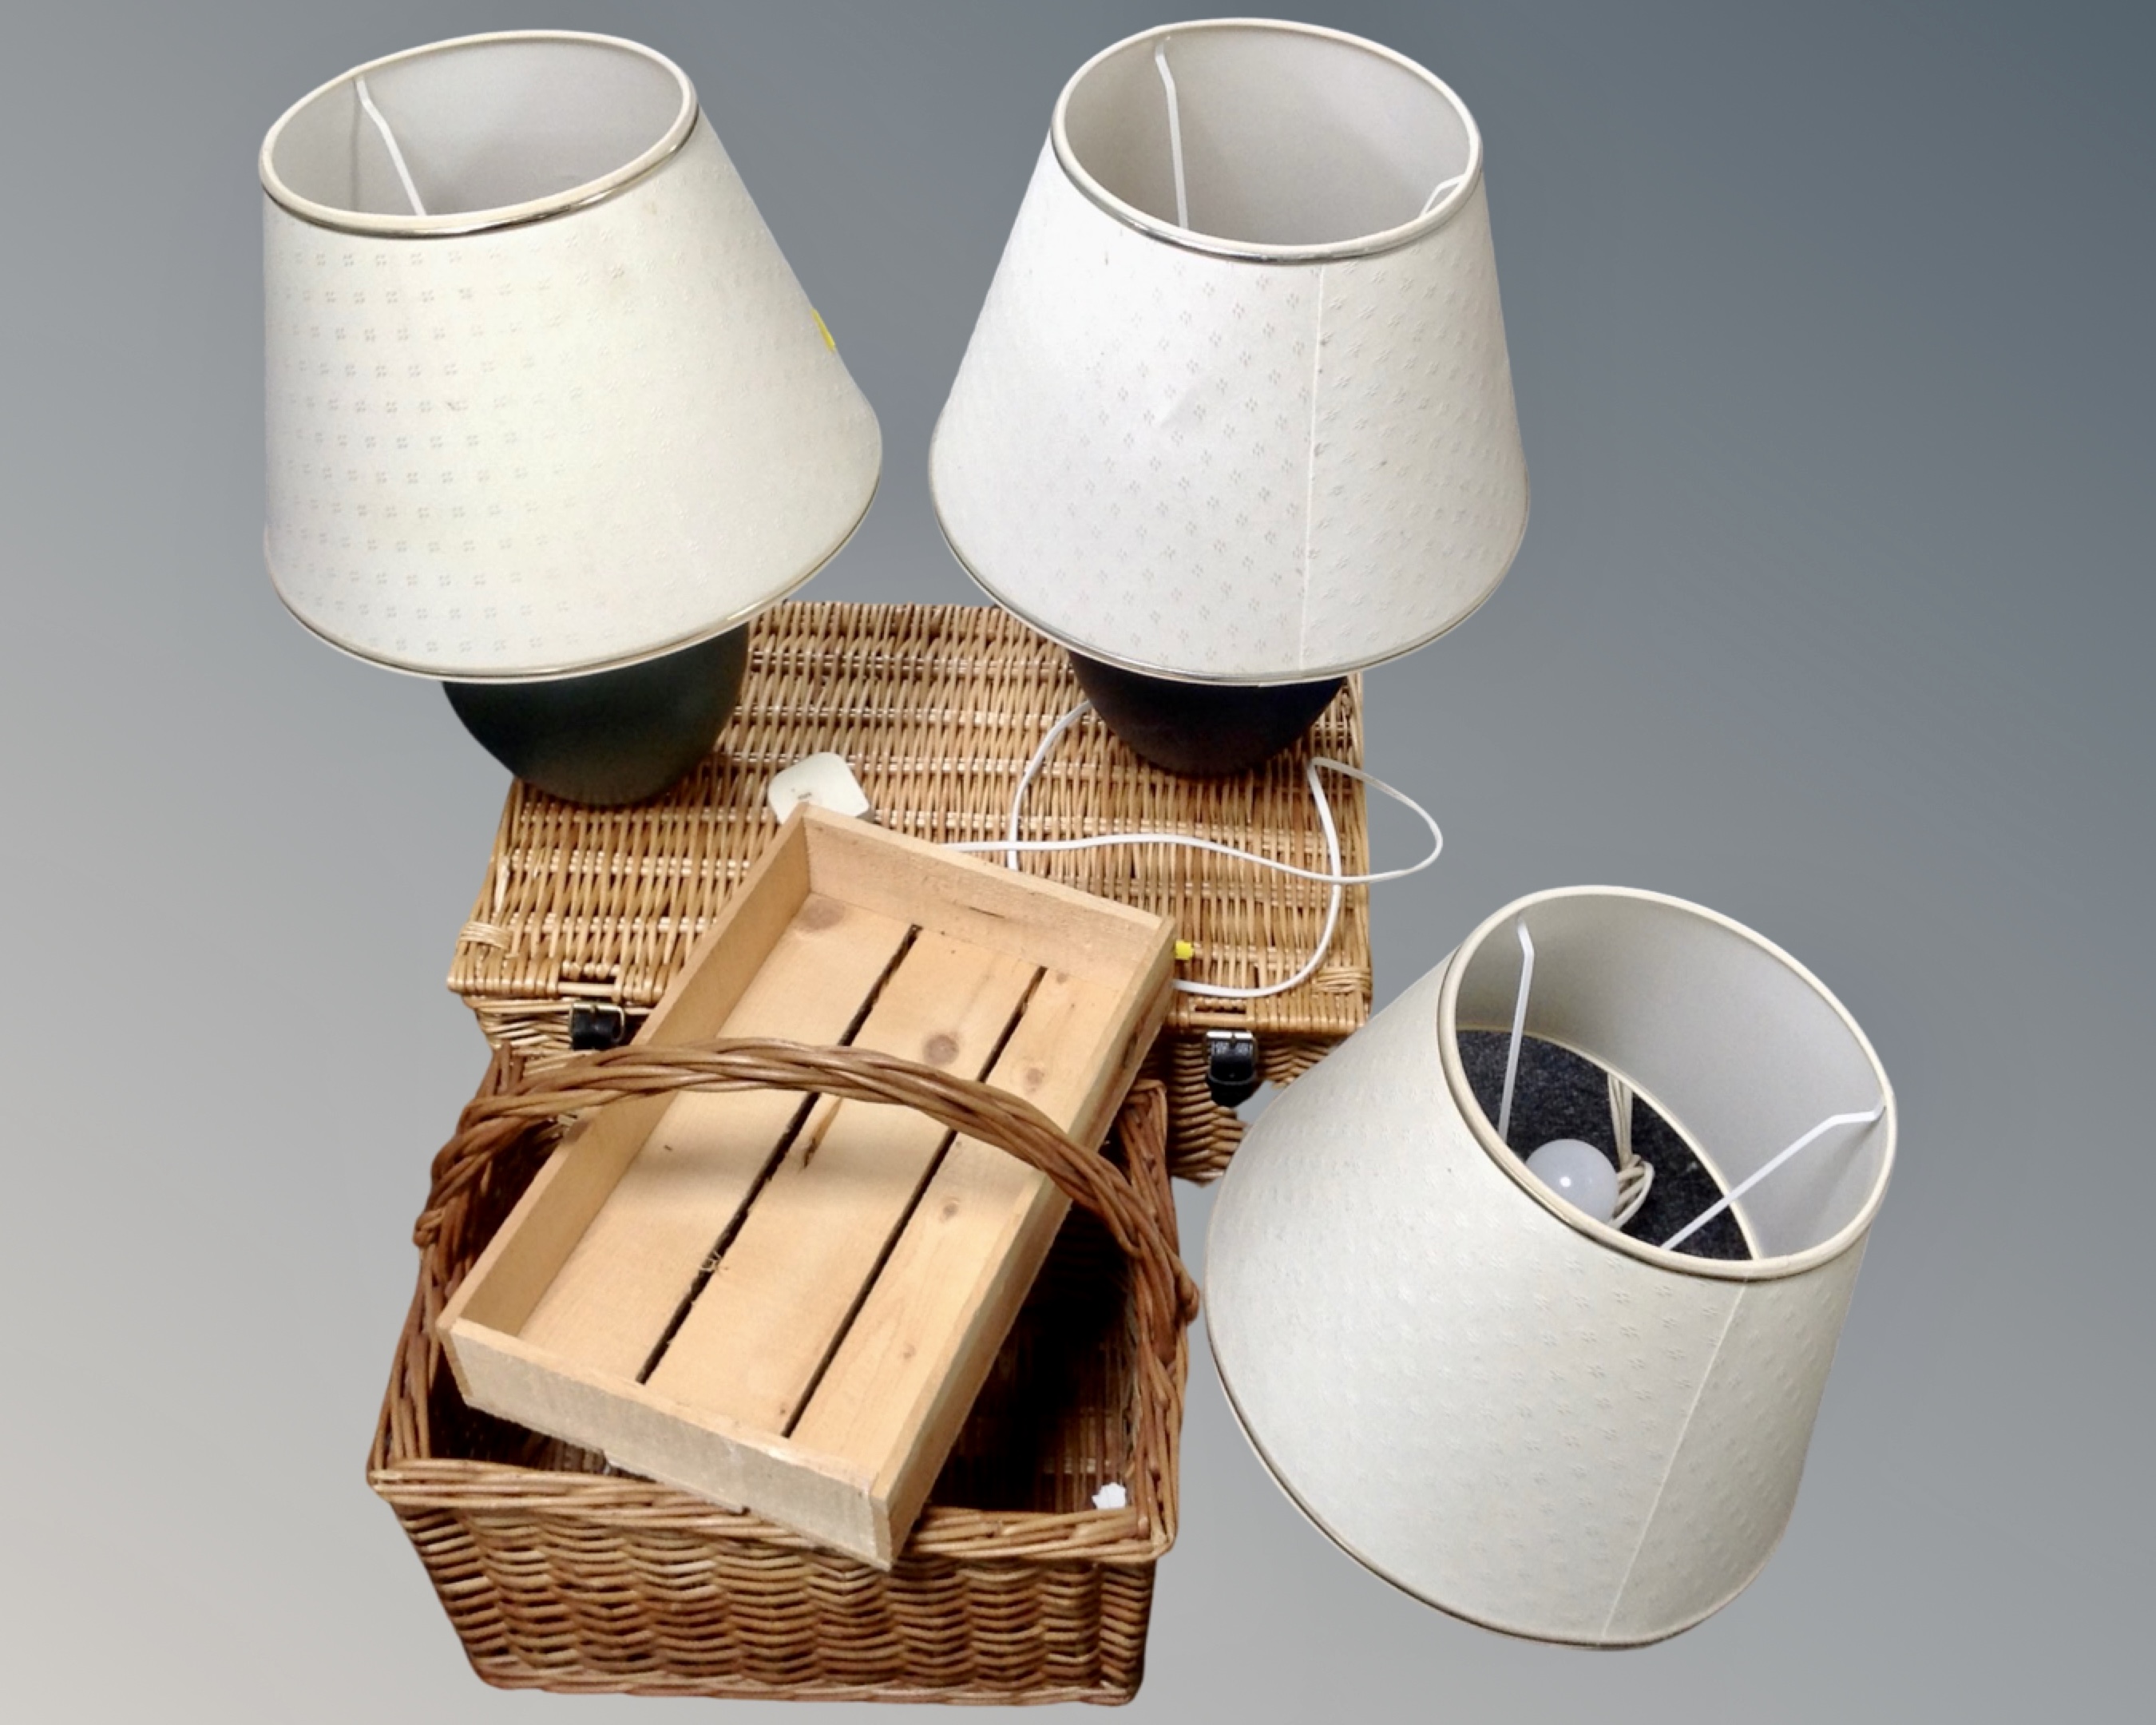 A wicker hamper, a wicker wine basket, a pine trough and three contemporary table lamps.